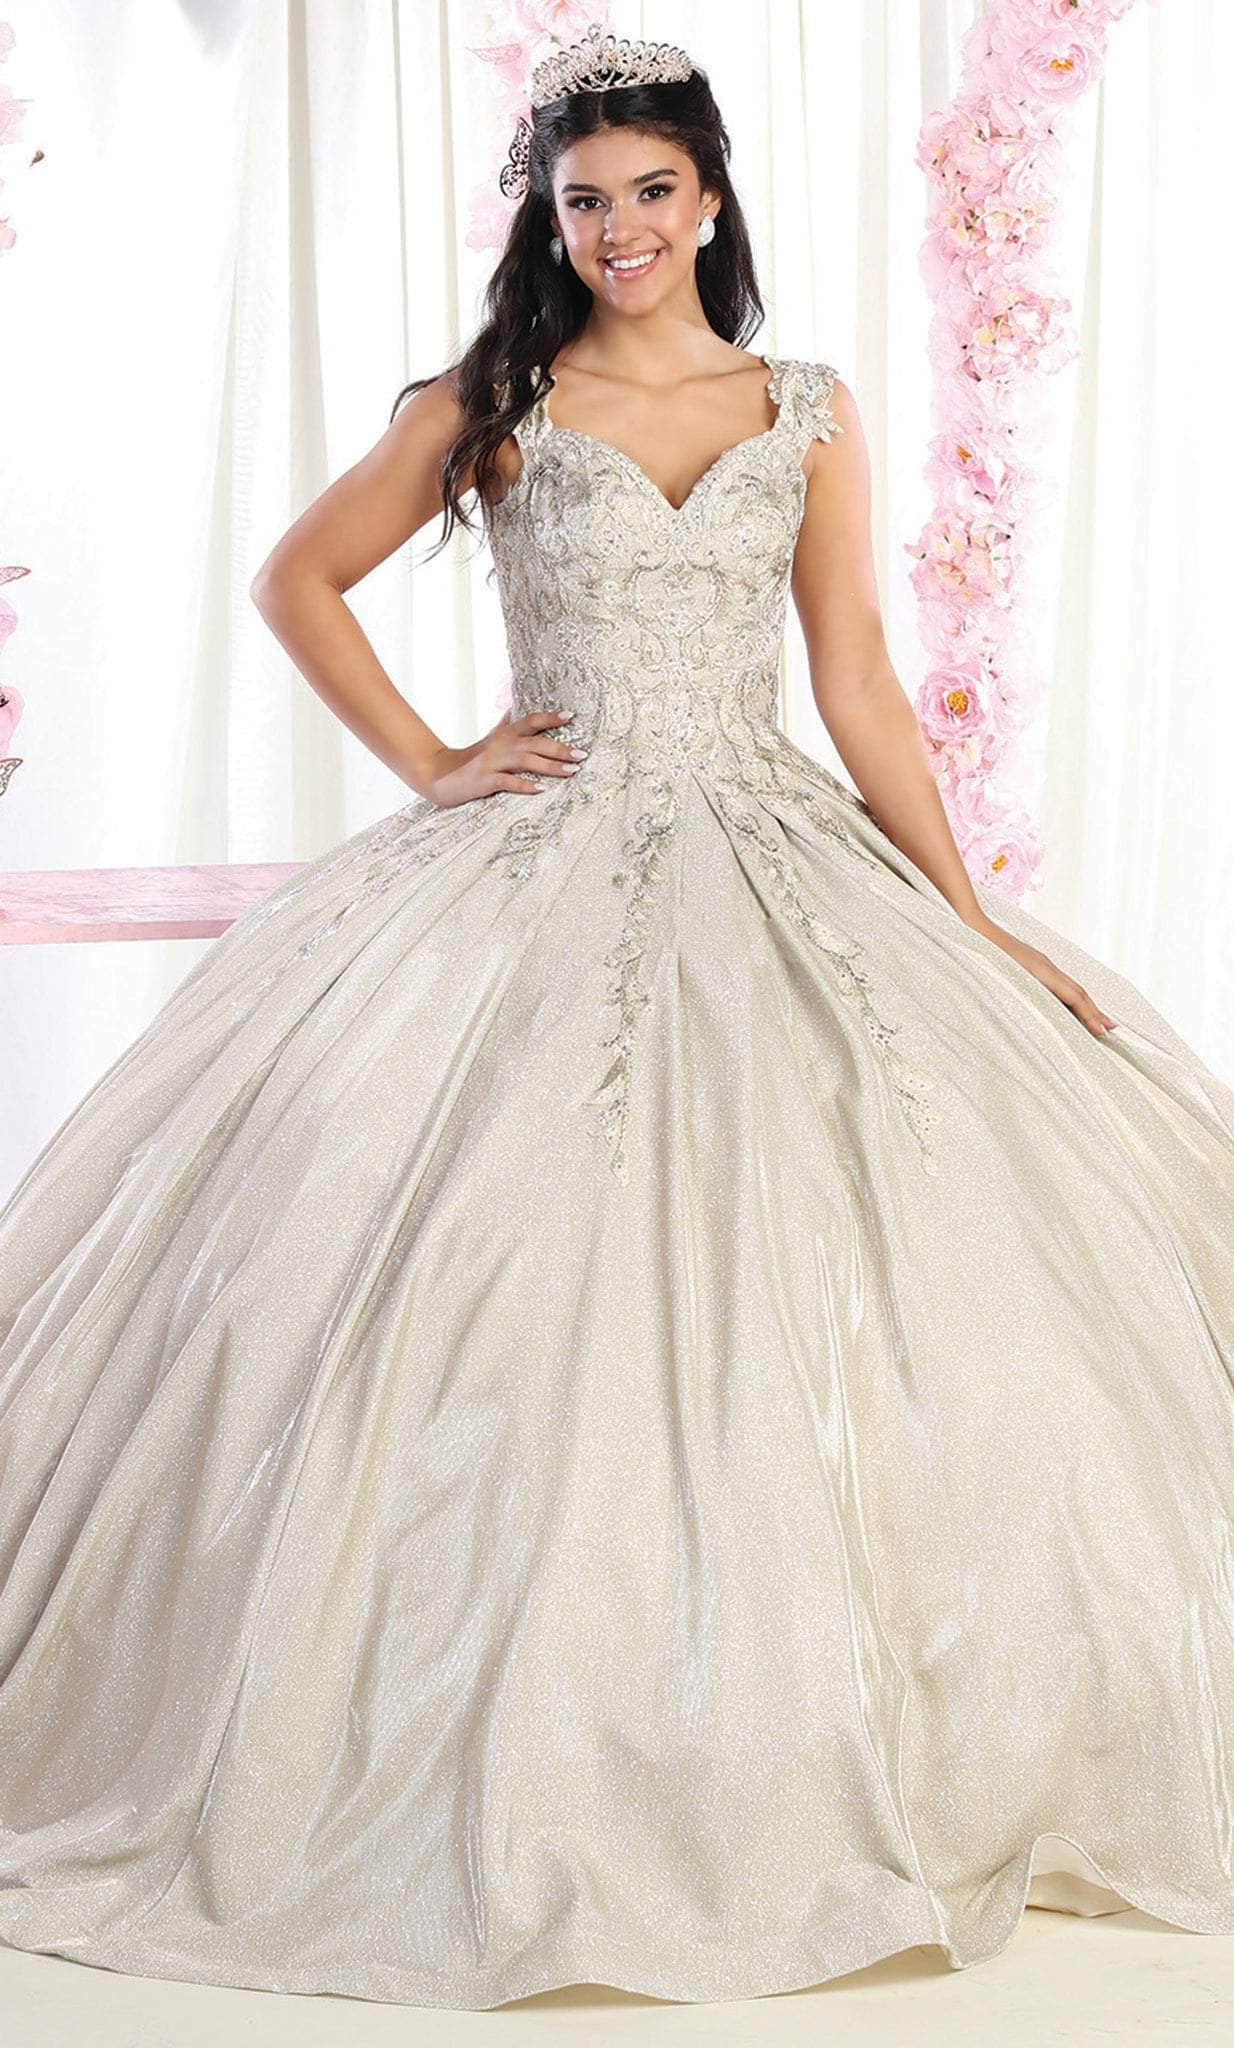 May Queen LK178 - Lace Detailed Quinceanera Ballgown Quinceanera Dresses 4 / Champagne